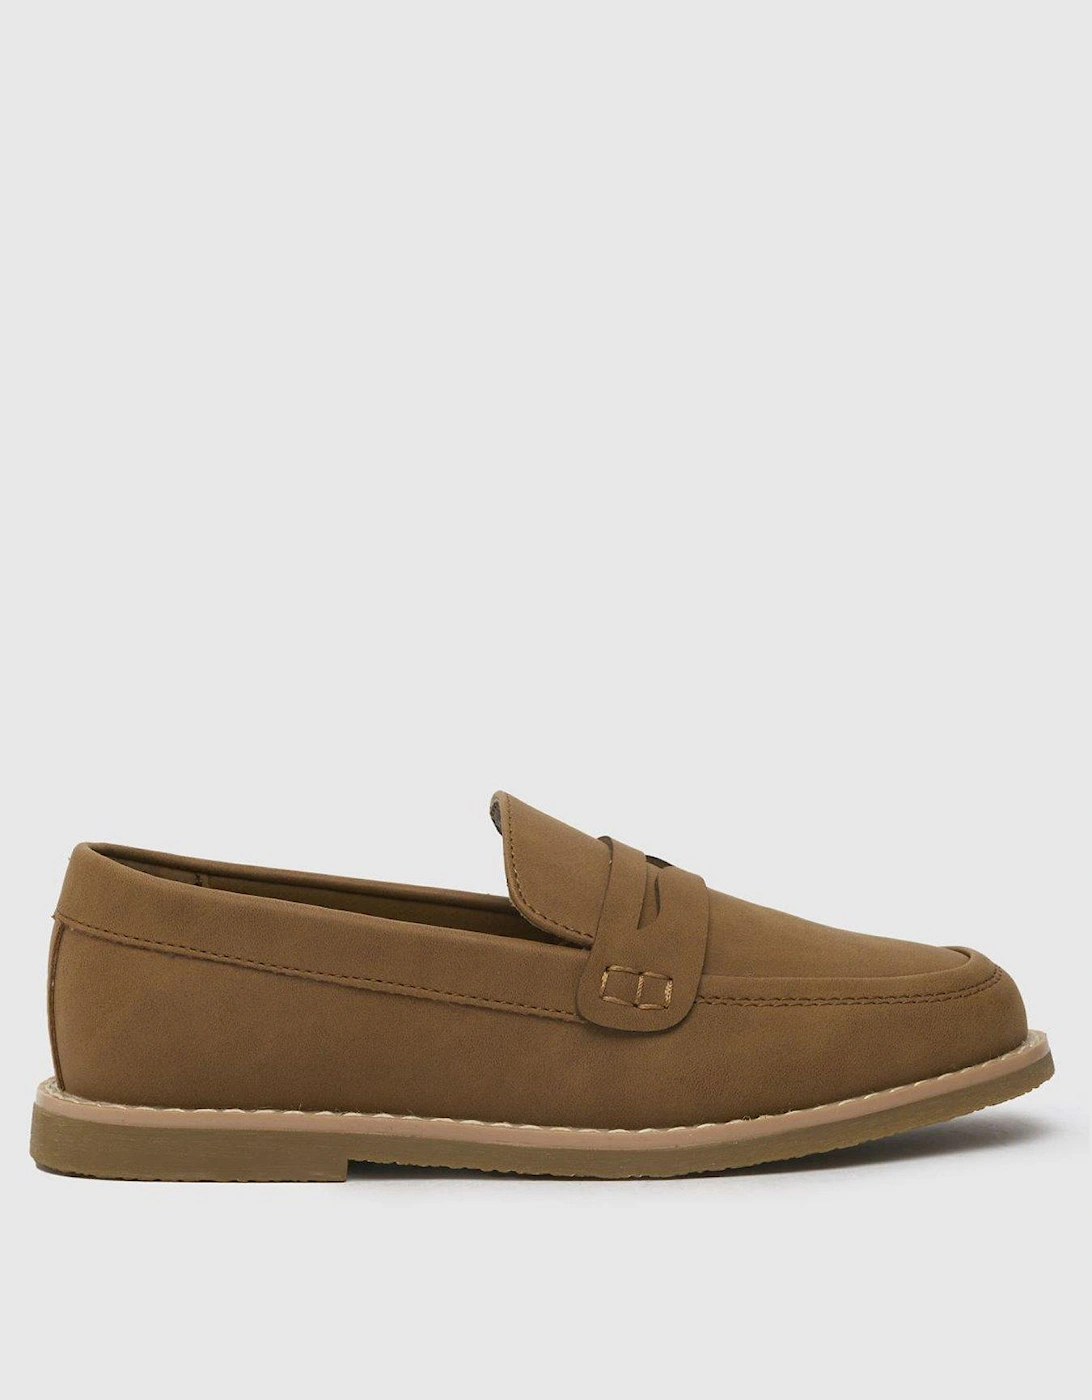 Limit Youth Loafer, 2 of 1